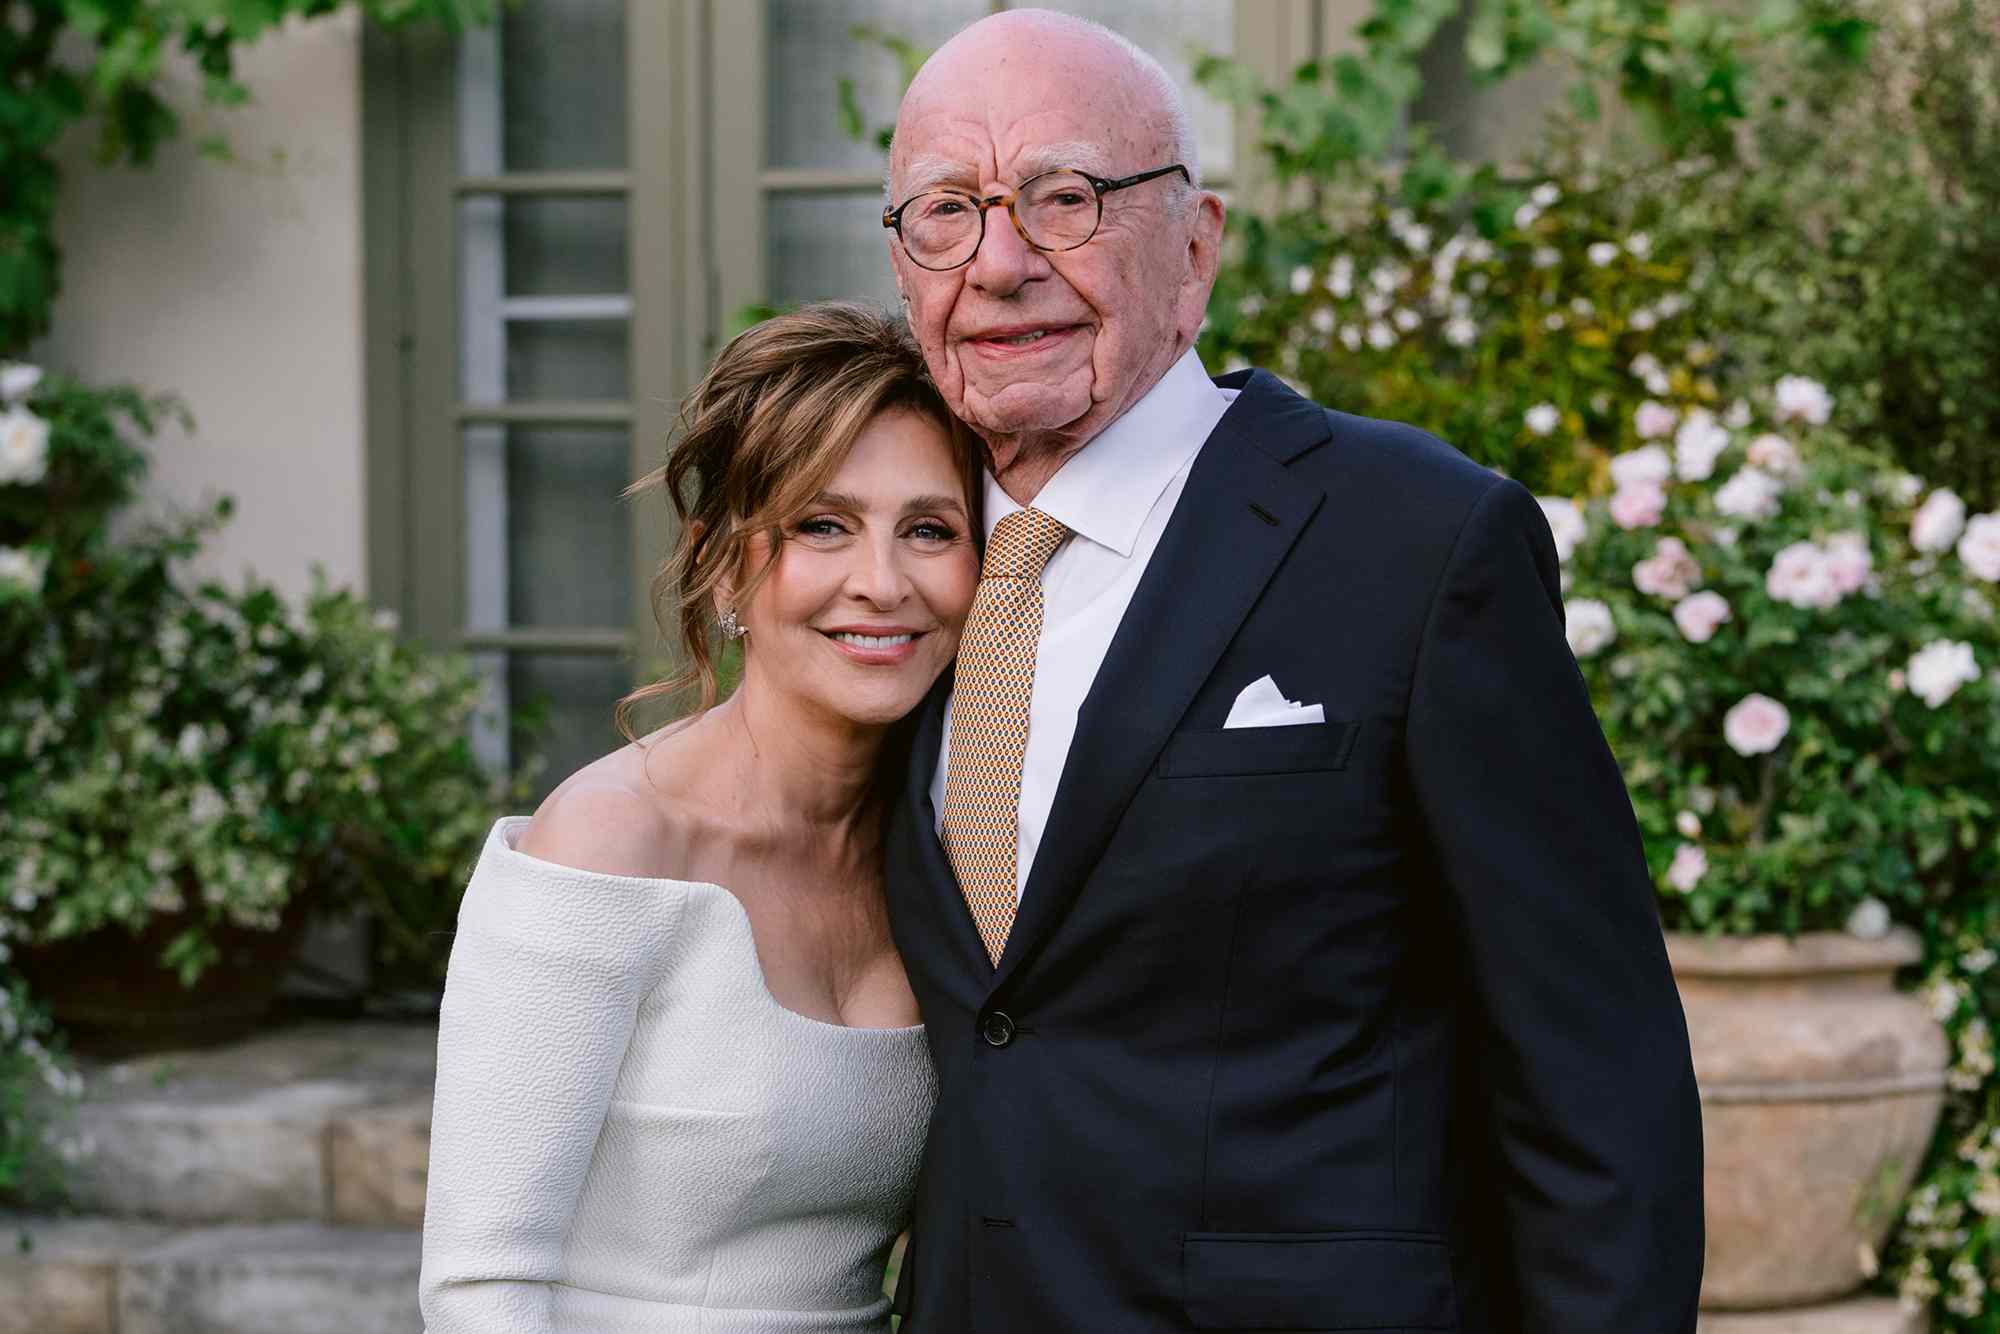 Rupert Murdoch, 93, and Elena Zhukova, 67, Are Married! Couple Says 'I Do' at His California Winery